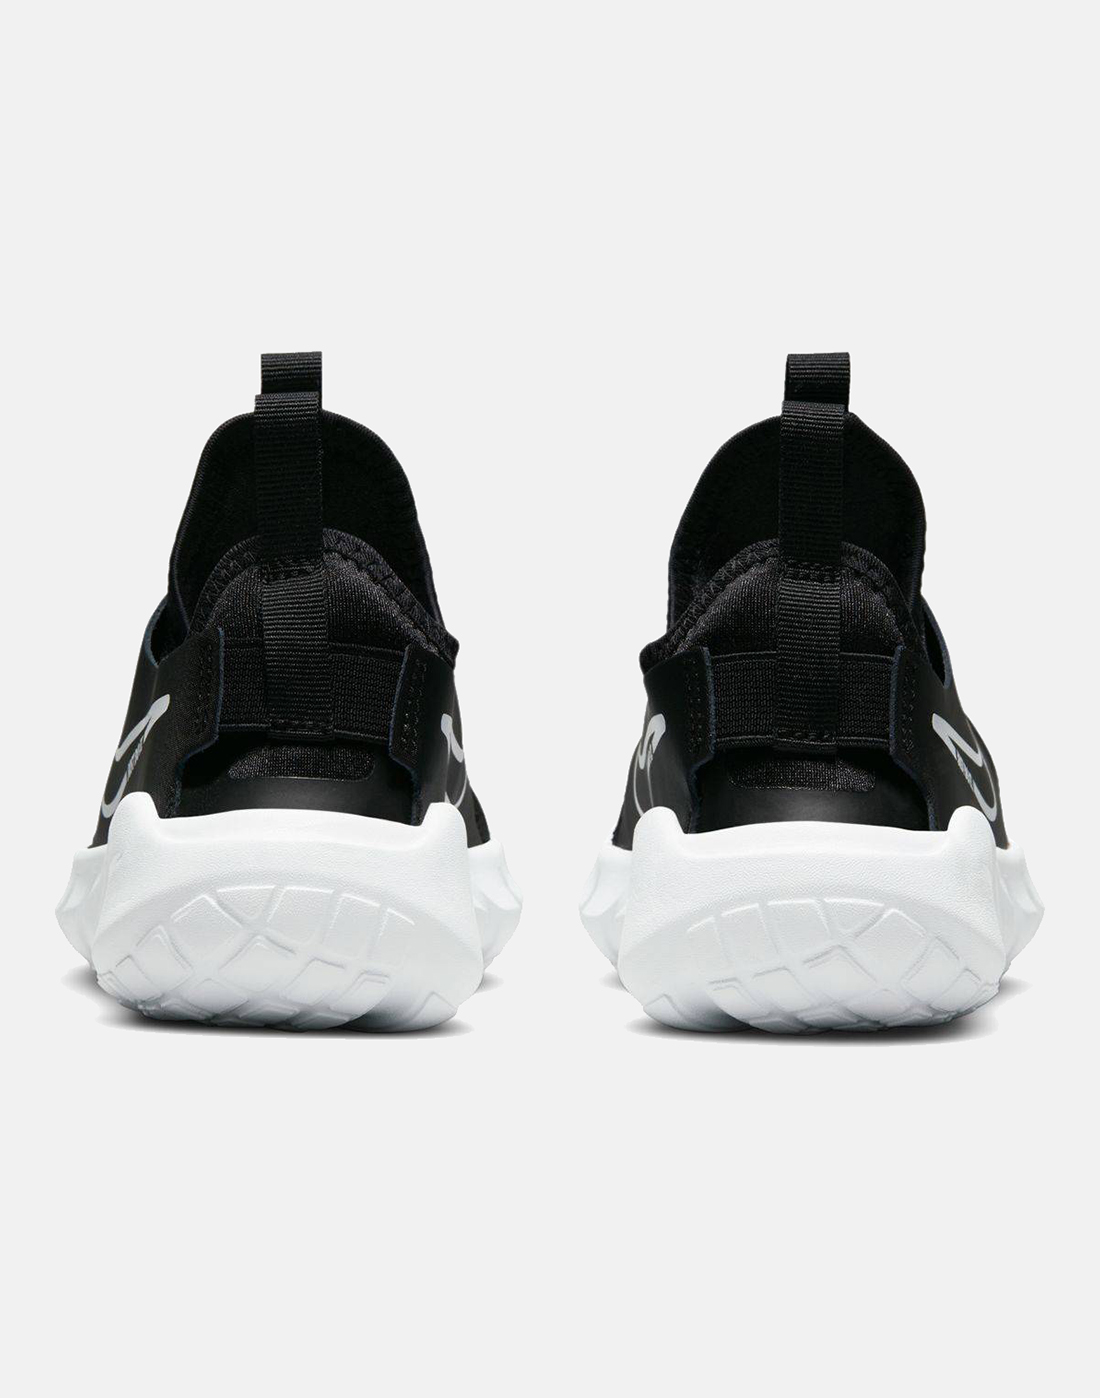 Nike Younger Kids Flex Runner - Black | Life Style Sports IE